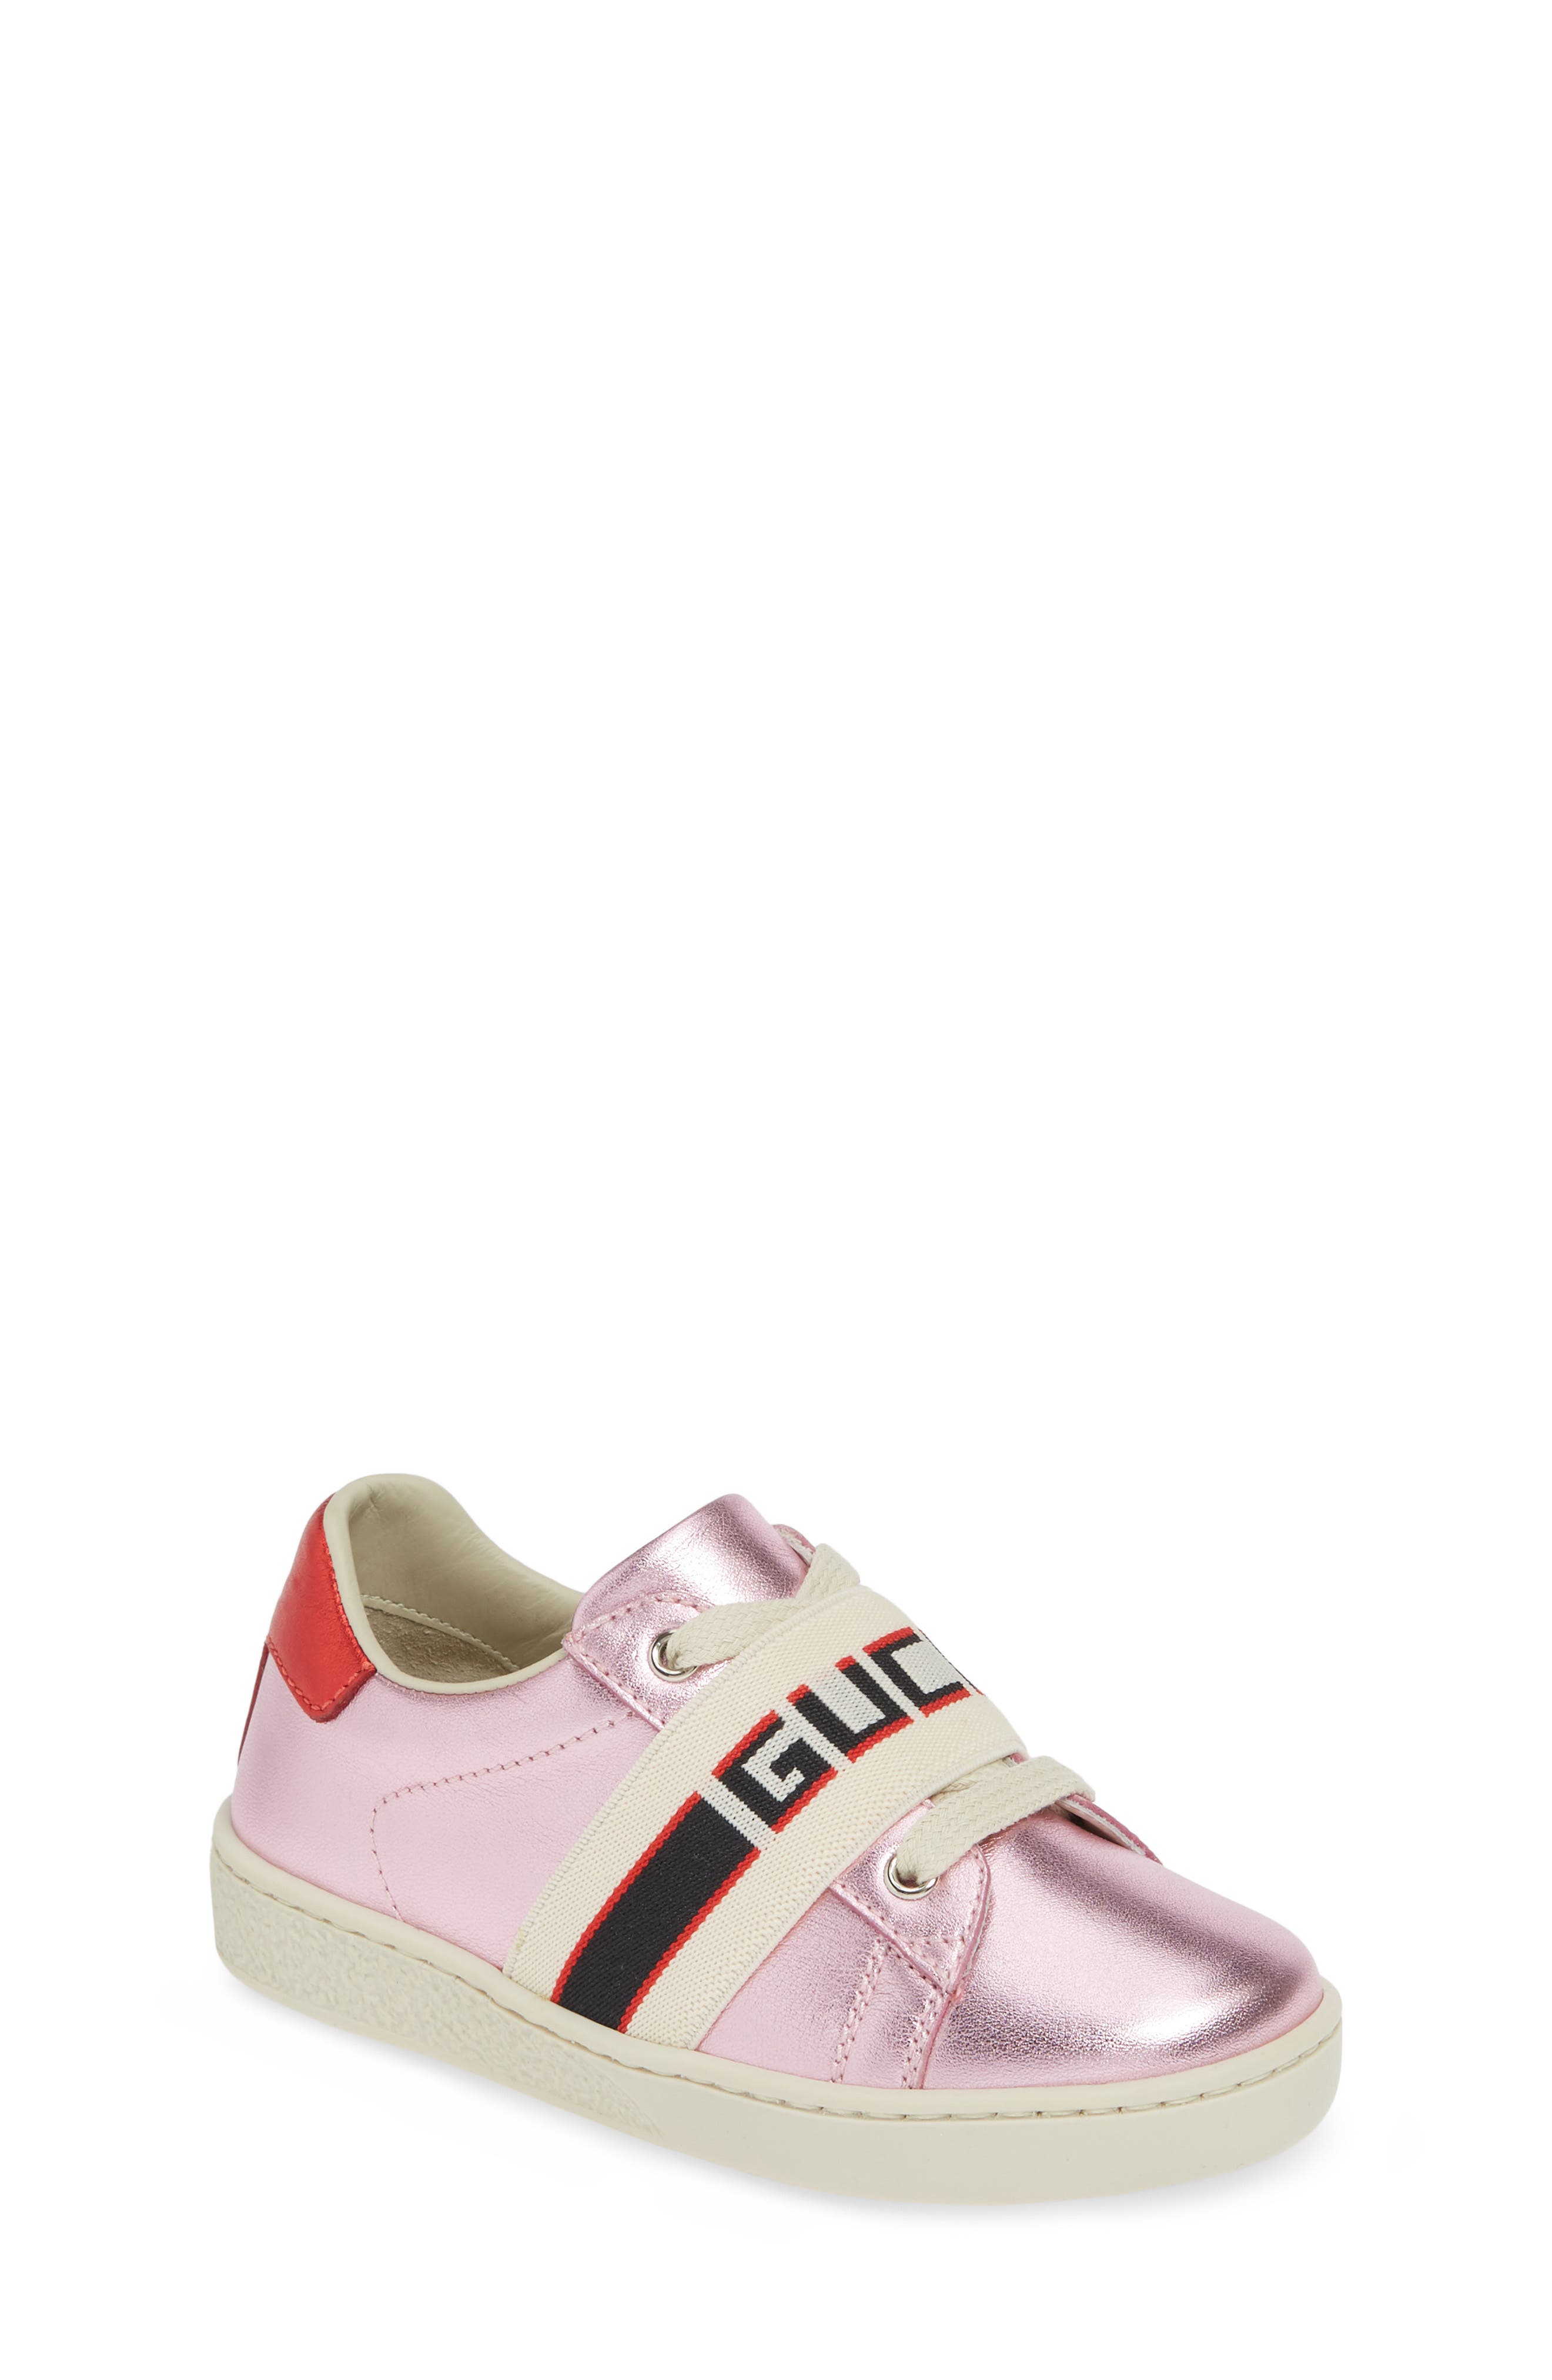 gucci shoes for little girls